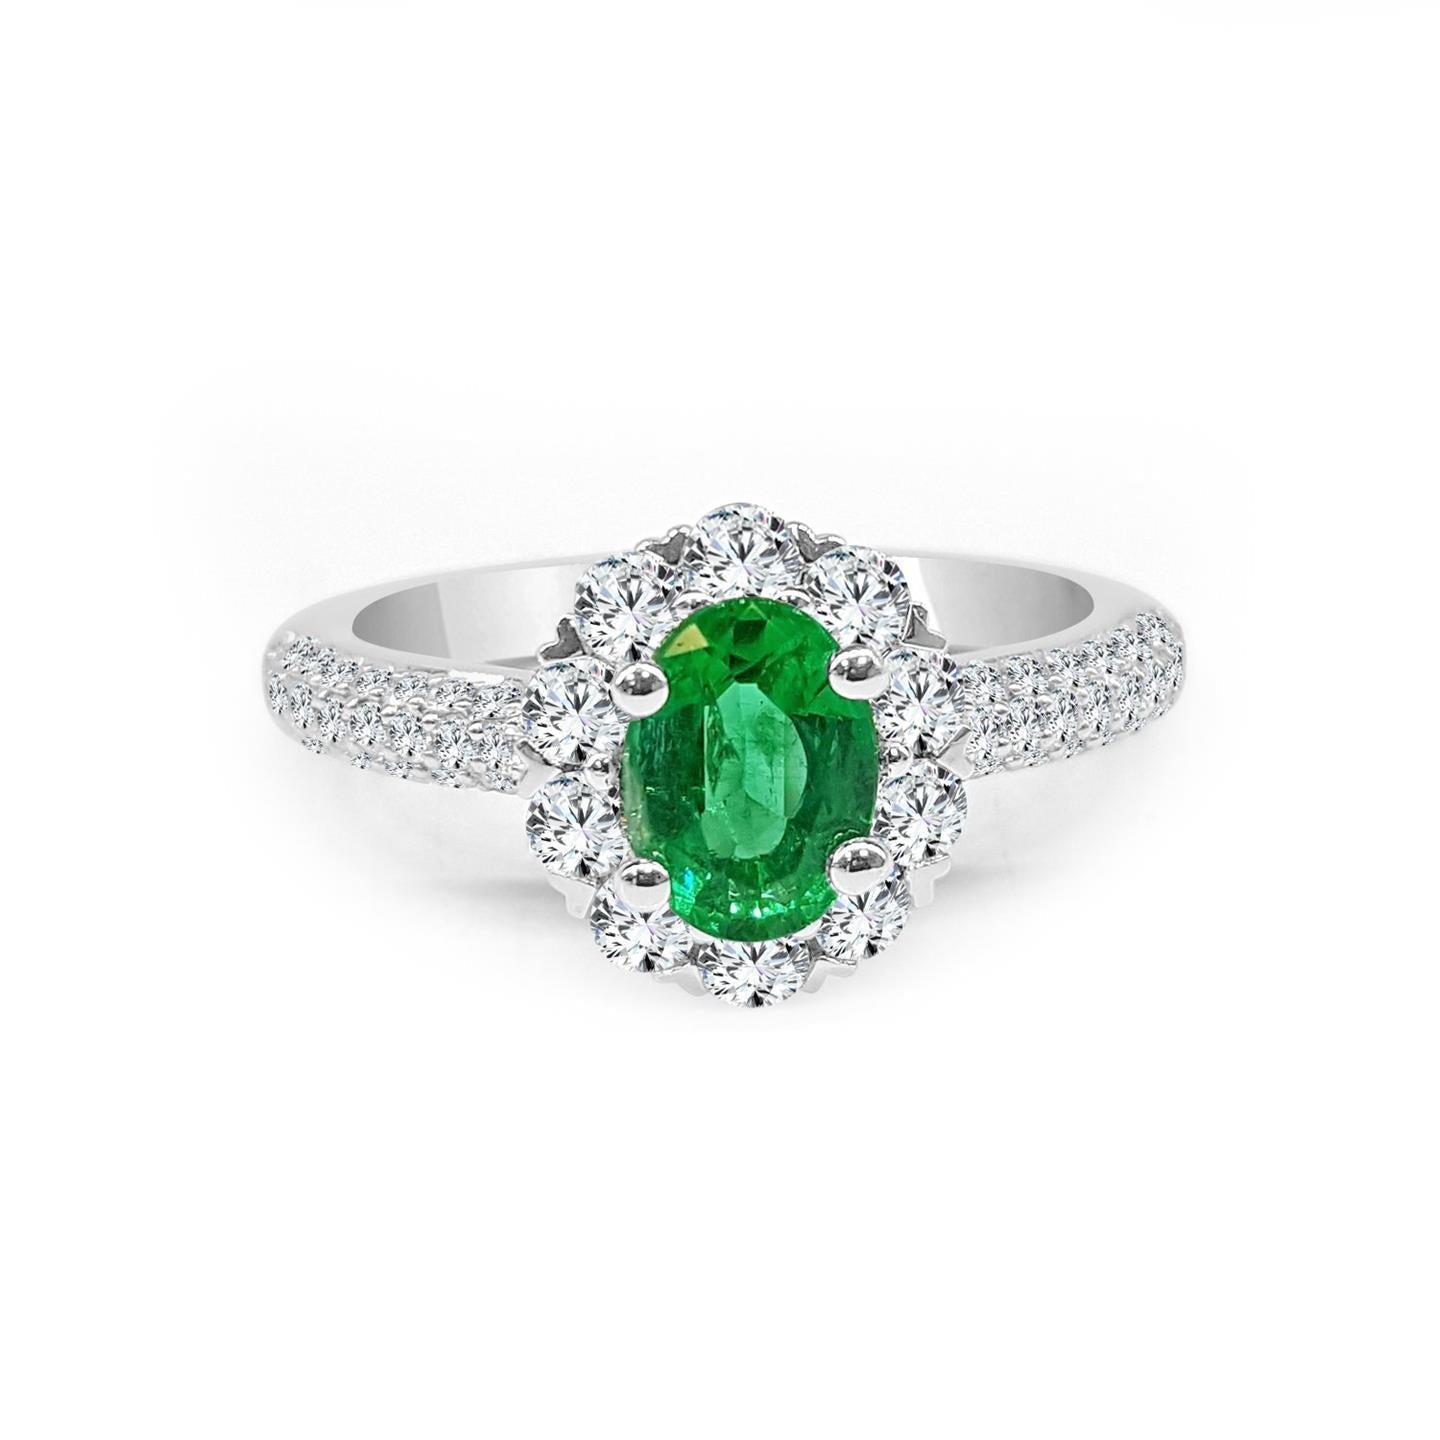 8 Carats Green Emerald And Diamonds Engagement Ring White Gold 14K - Gemstone Ring-harrychadent.ca